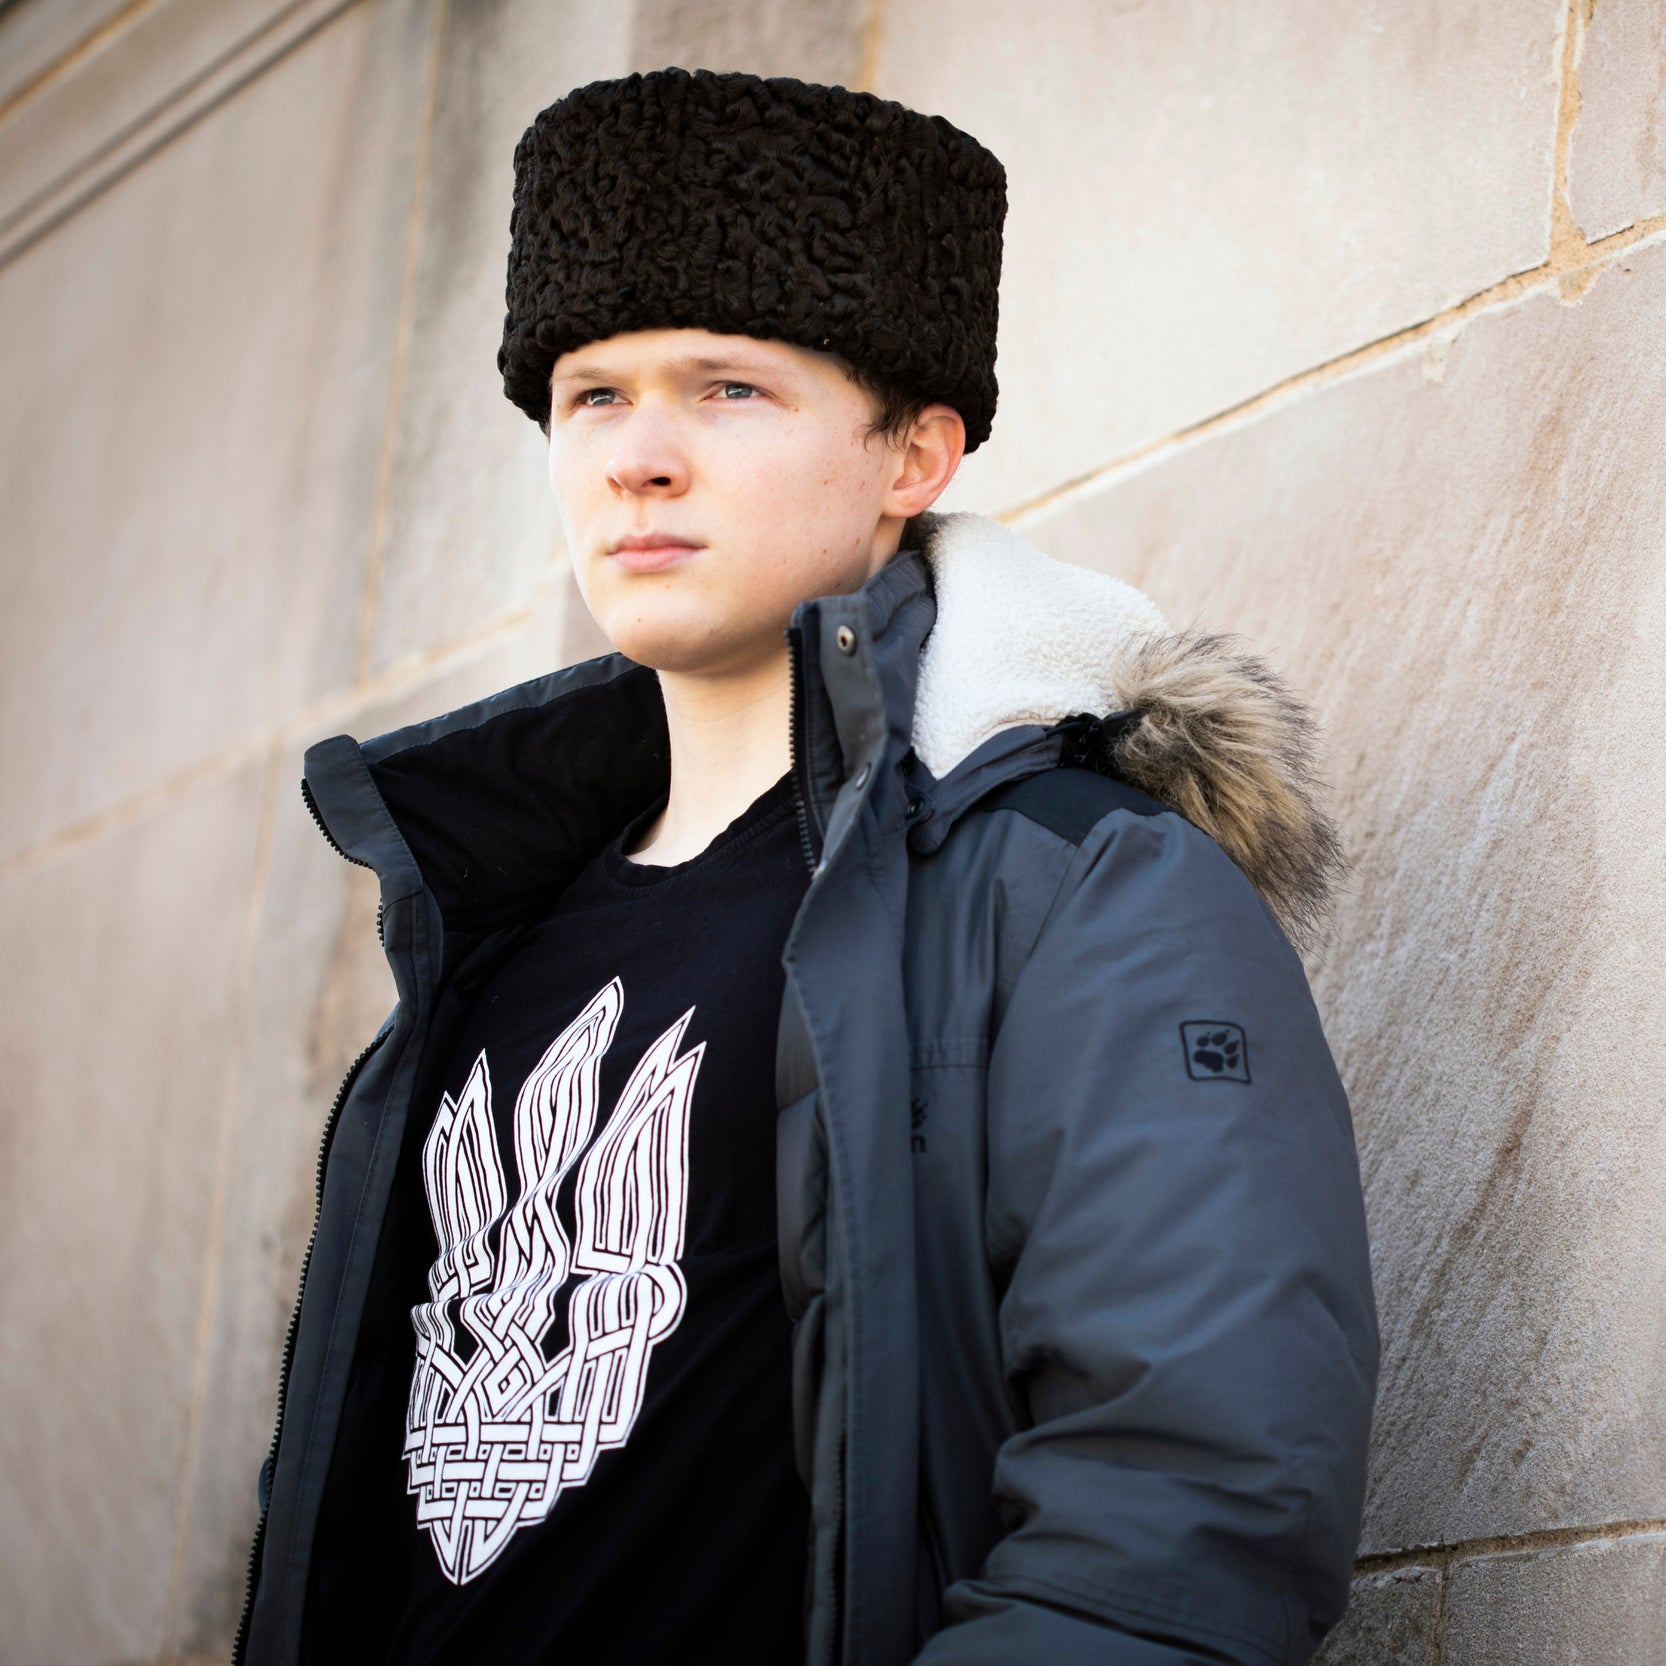 A student wearing a traditional Ukrainian hat